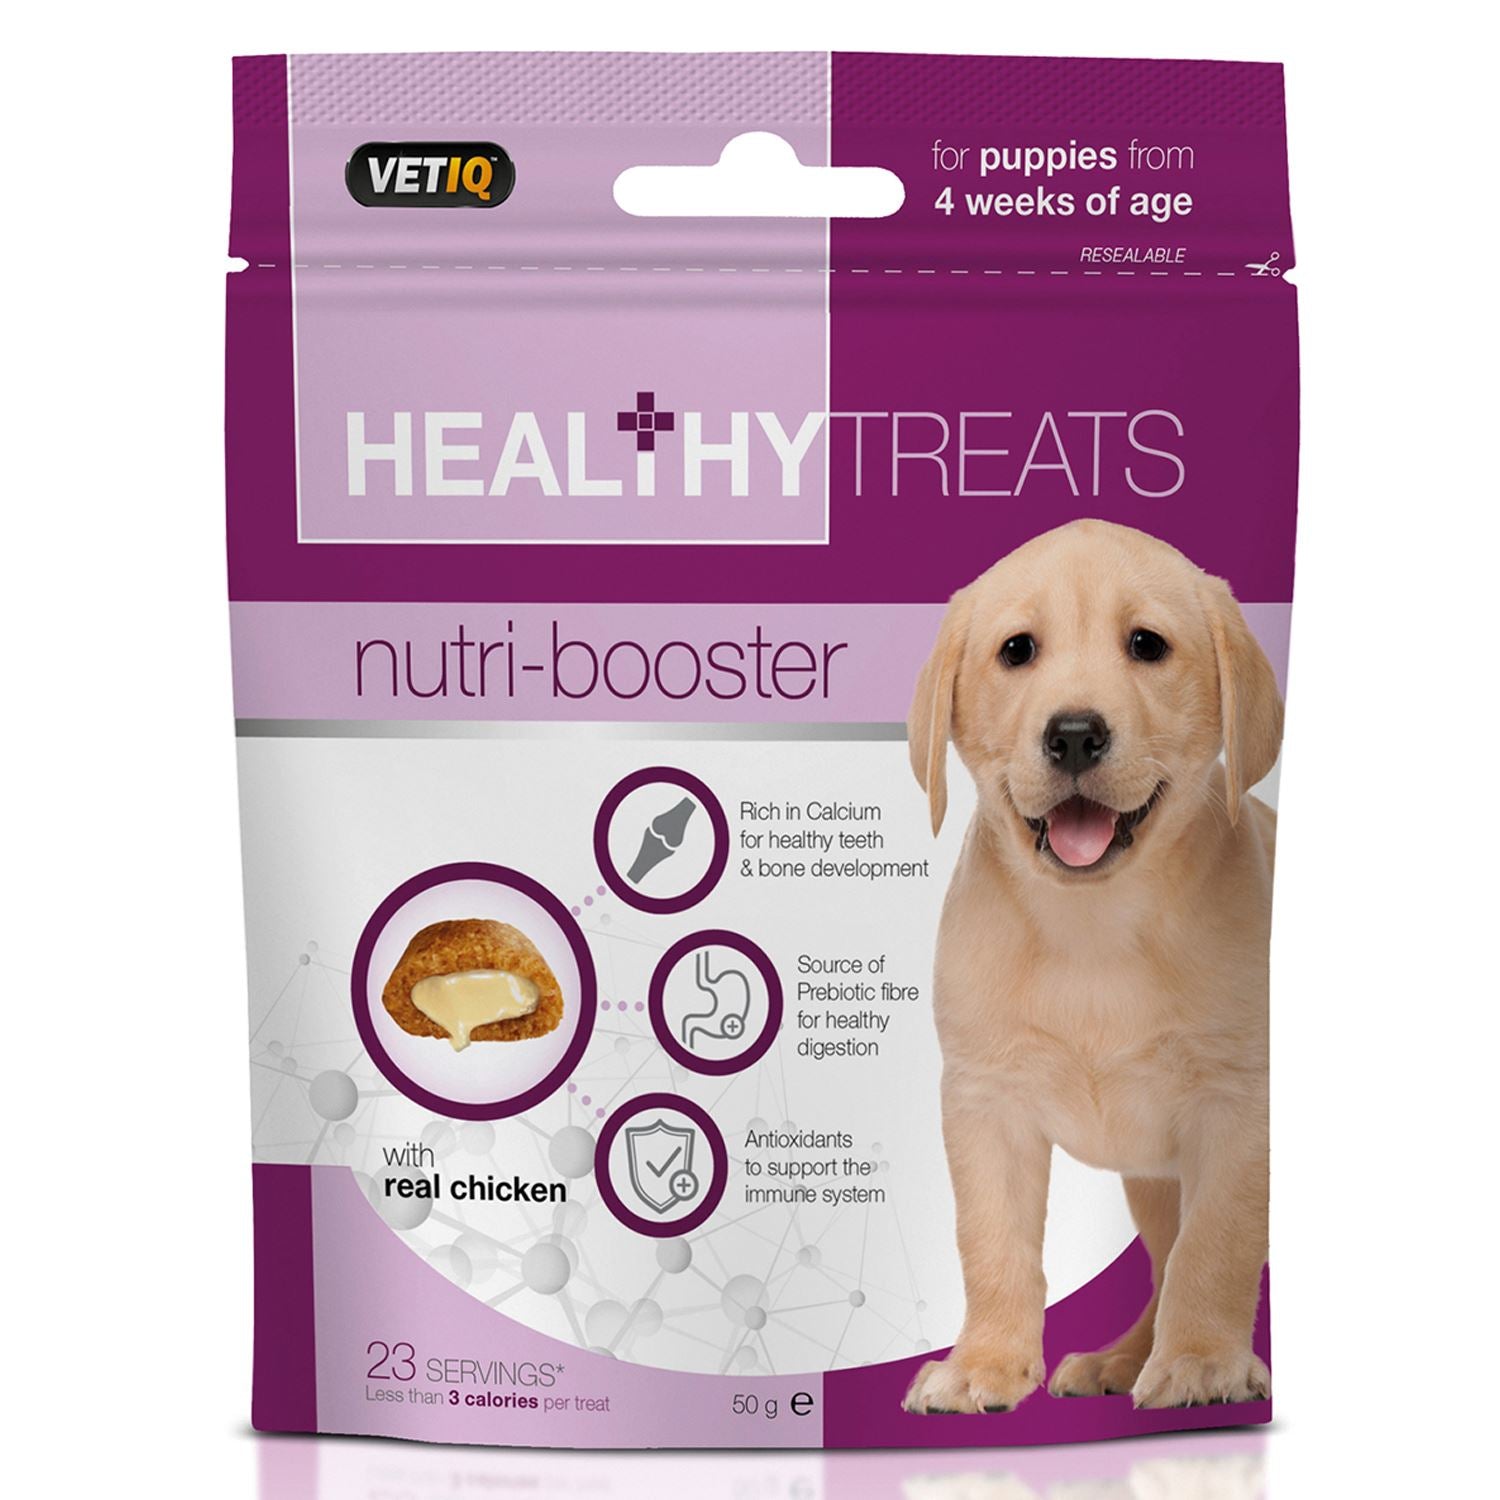 Vetiq Healthy Treats Nutri-Booster For Puppies - Just Horse Riders